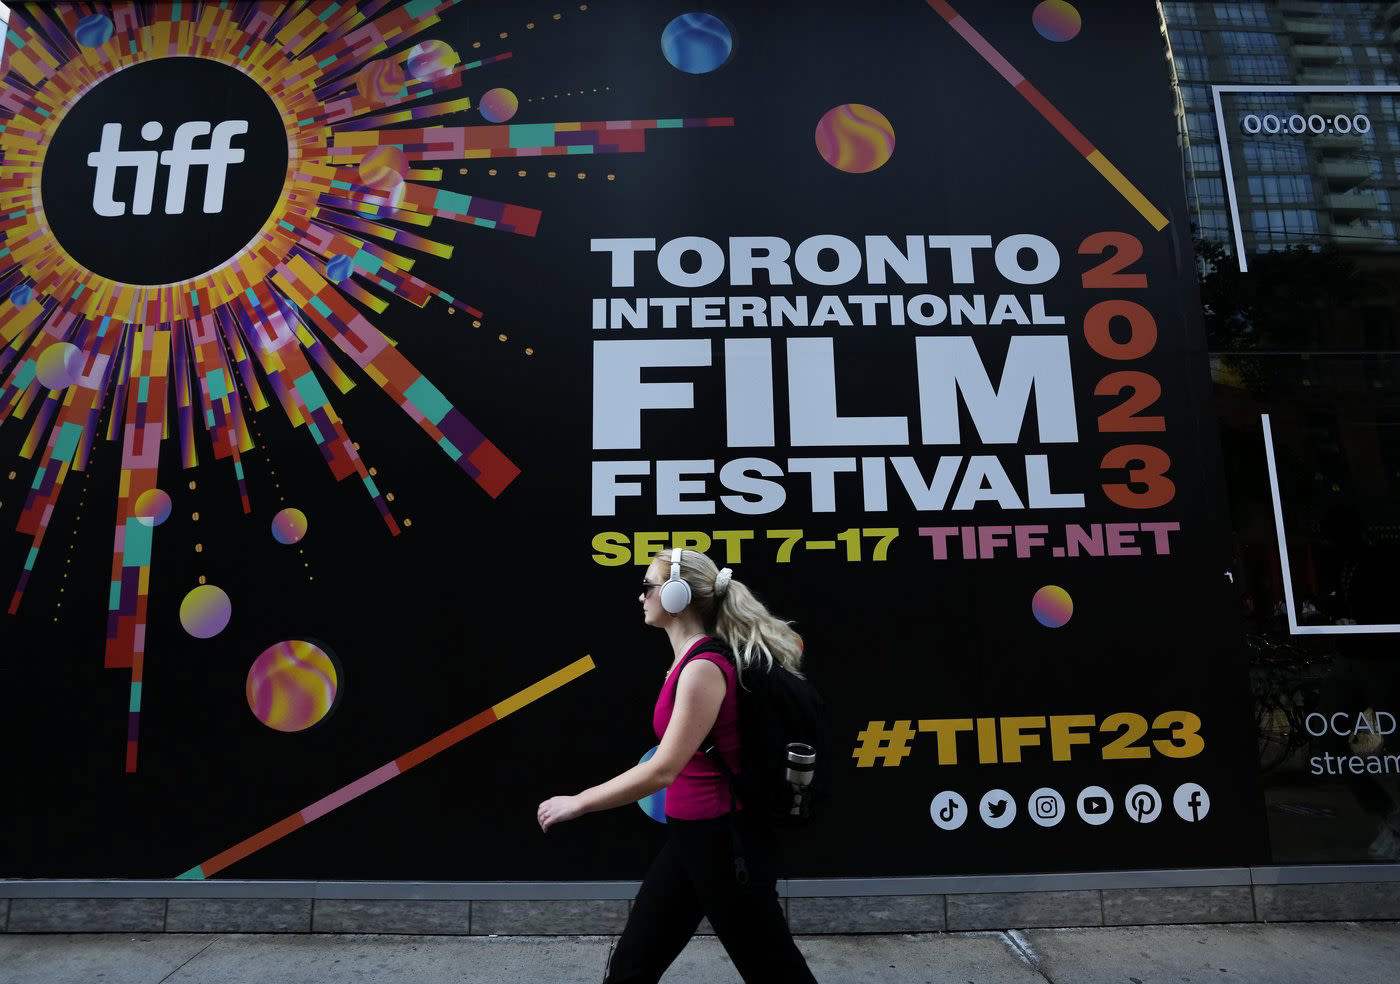 Rogers jumps aboard TIFF as top sponsor of film festival, but not year-round events